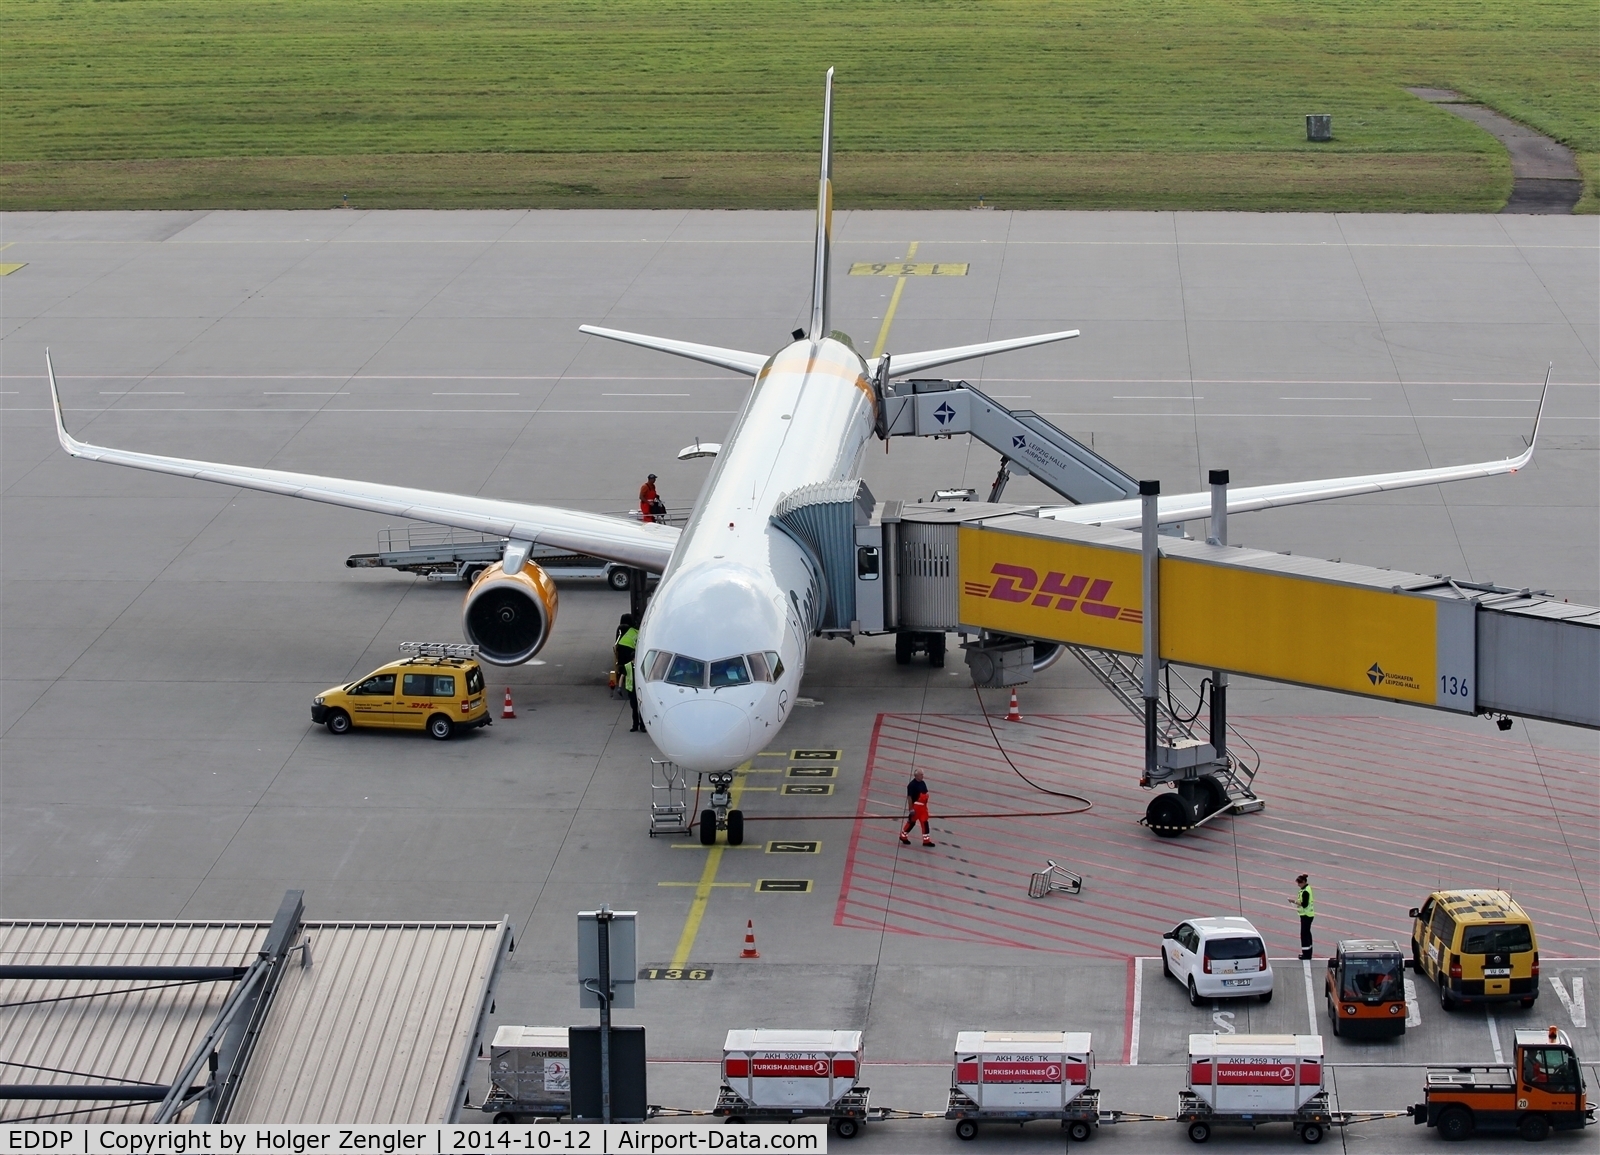 Leipzig/Halle Airport, Leipzig/Halle Germany (EDDP) - Preparations for a flight to AYT are running at stand 136....